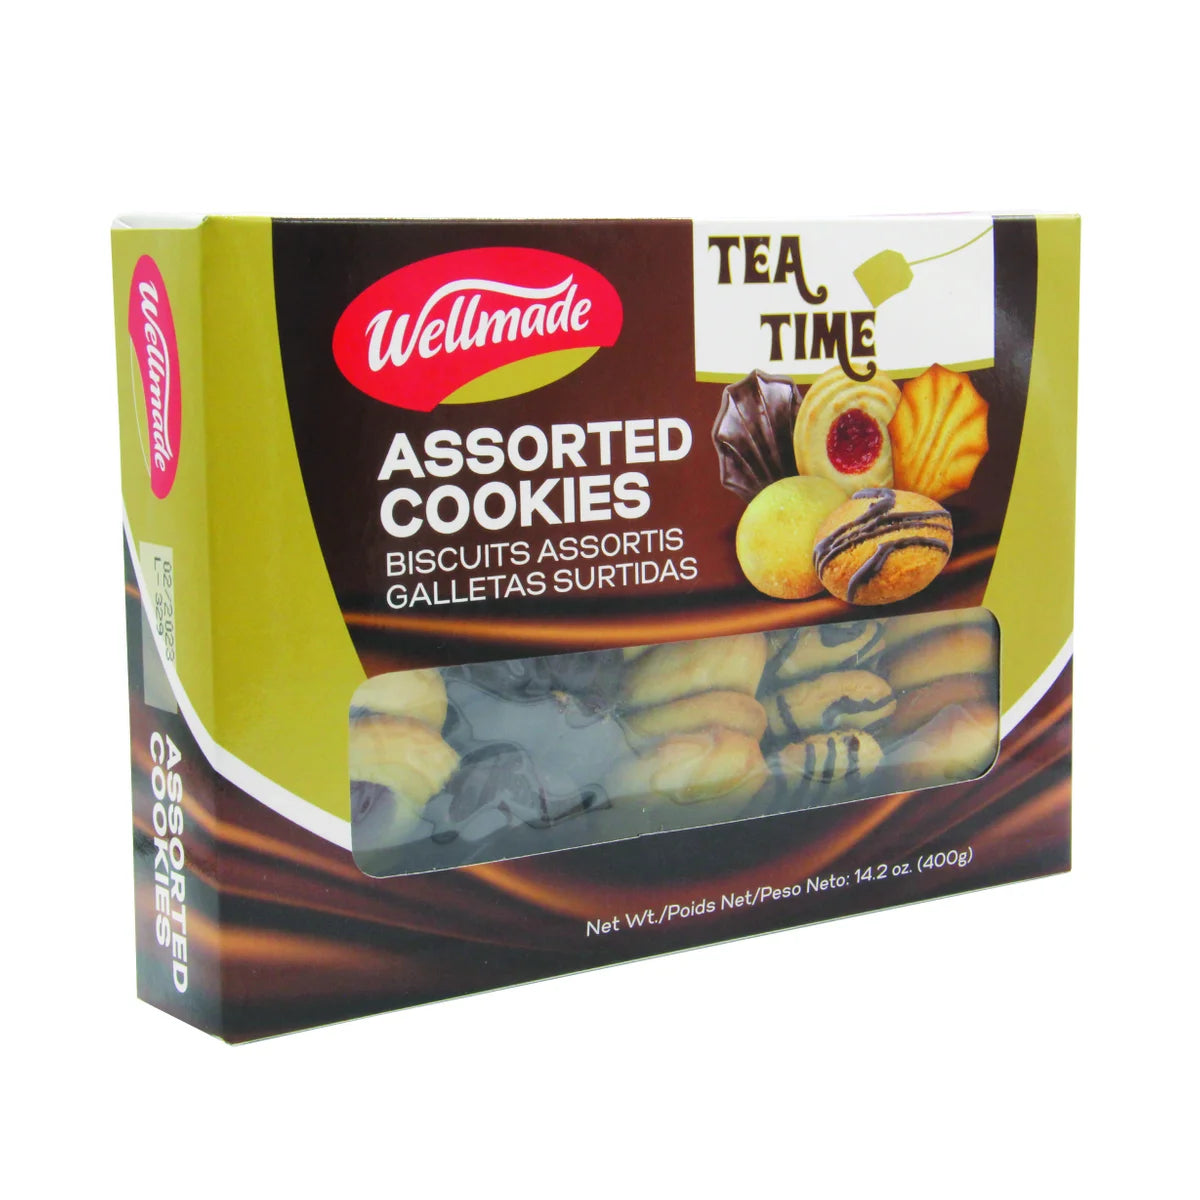 tea-time-assorted-cookies-wellmade-400g